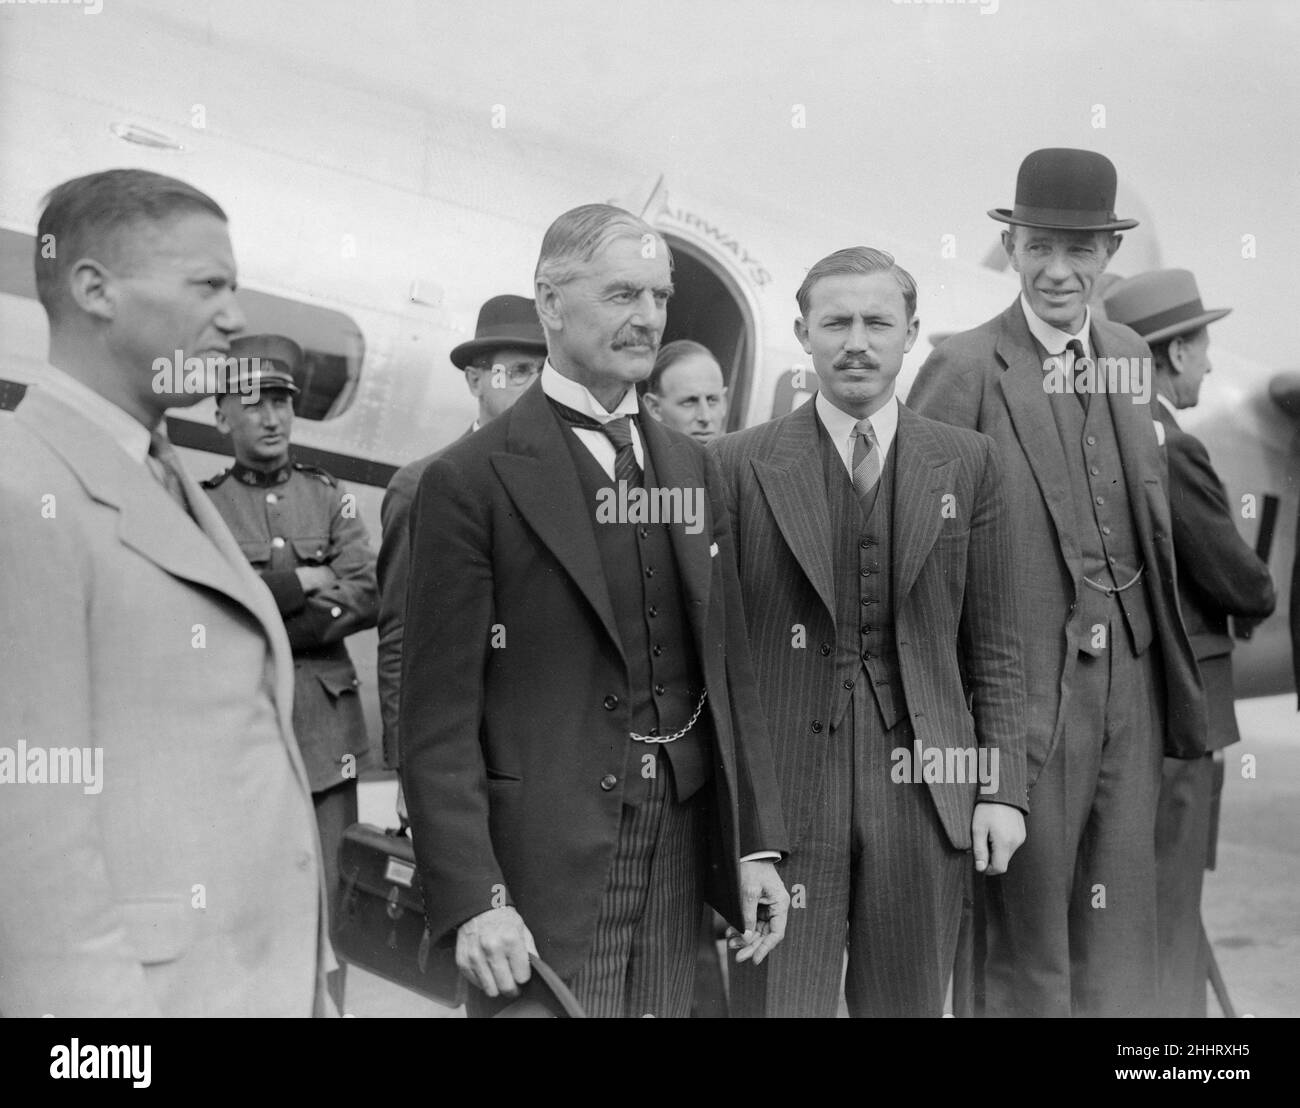 British Prime Minister Neville Chamberlain at Heston airport for a meeting with German Chancellor Adolf Hitler in Munich. 15th September 1938. Stock Photo